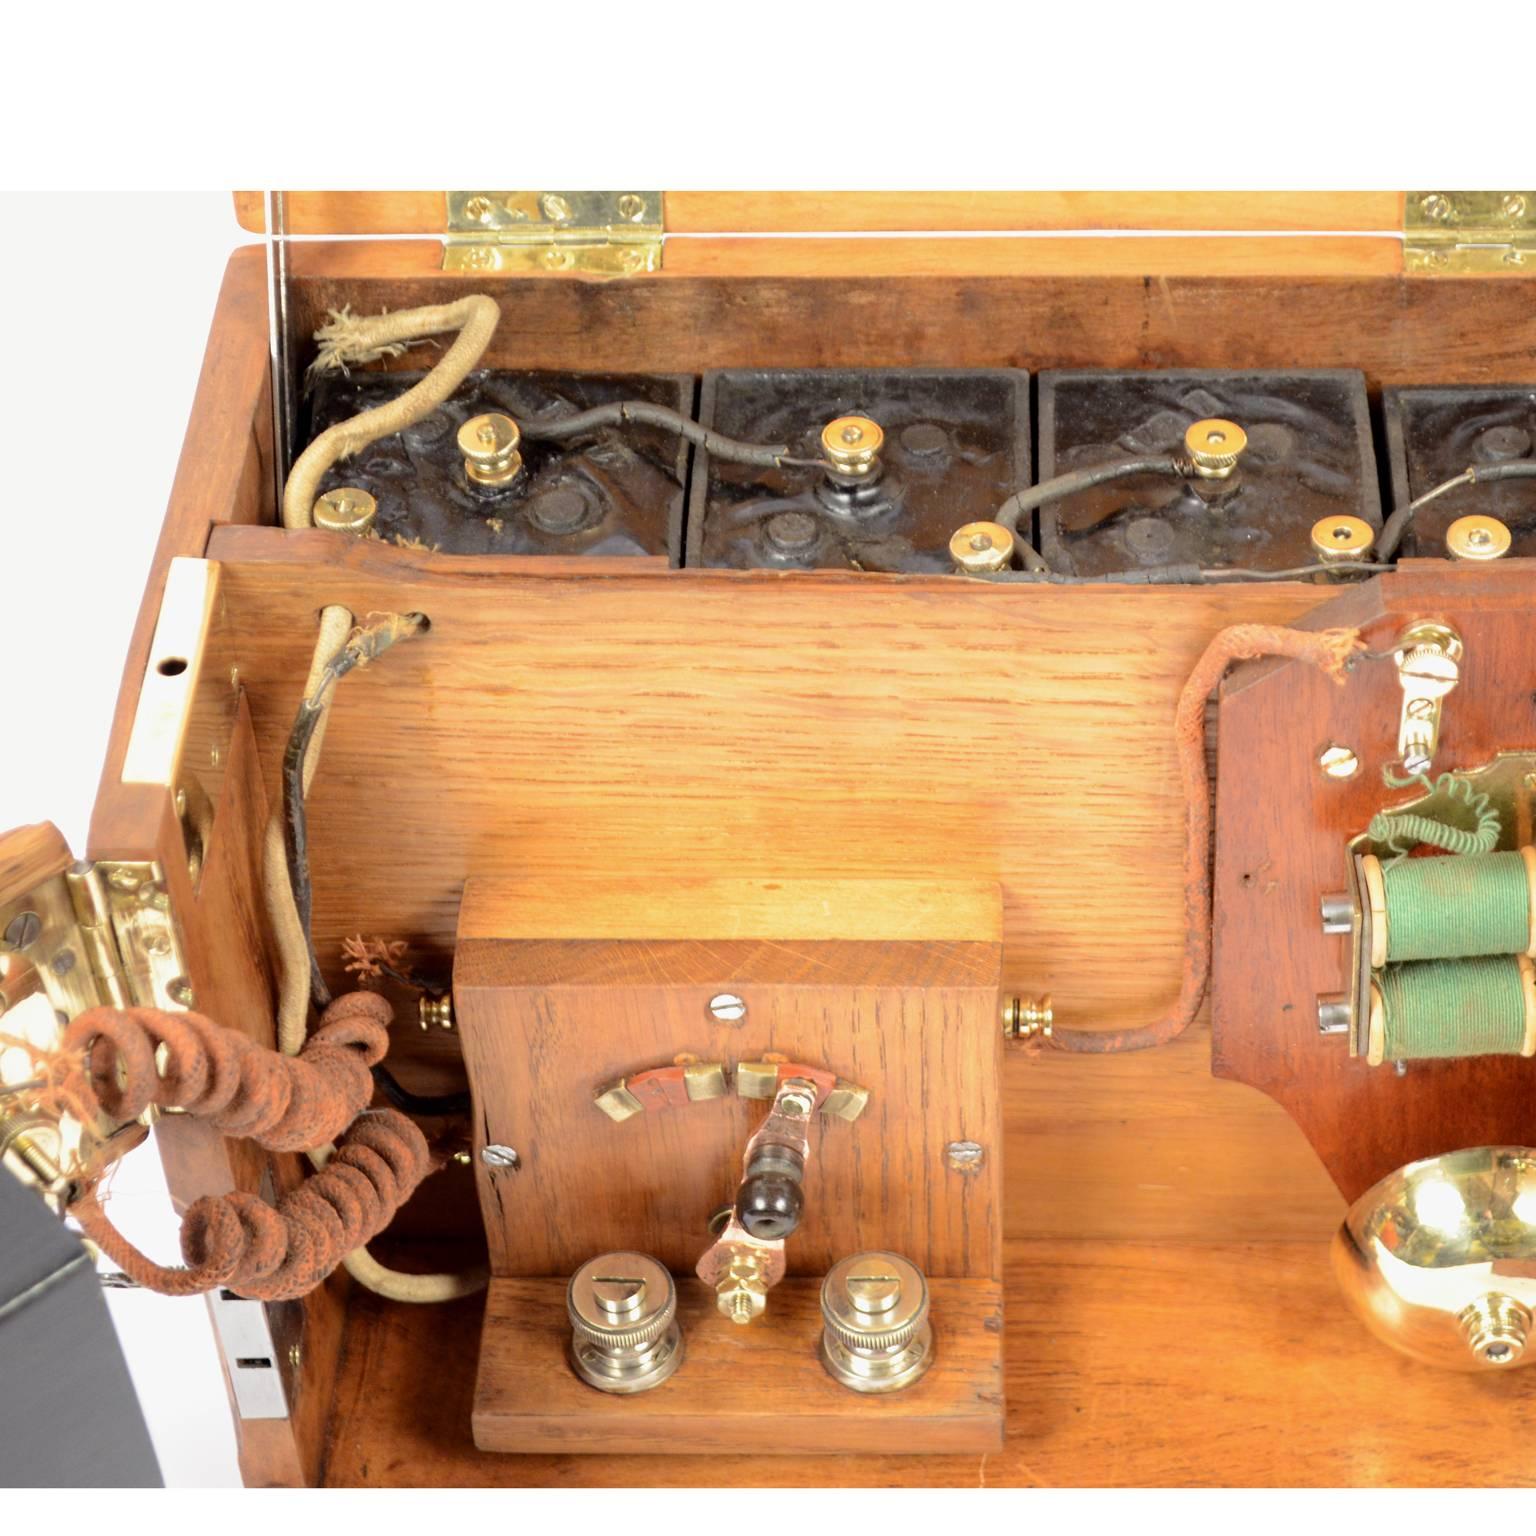 French Telegraph power supply in its Oakwood Box of the Second Half of the 19th Century